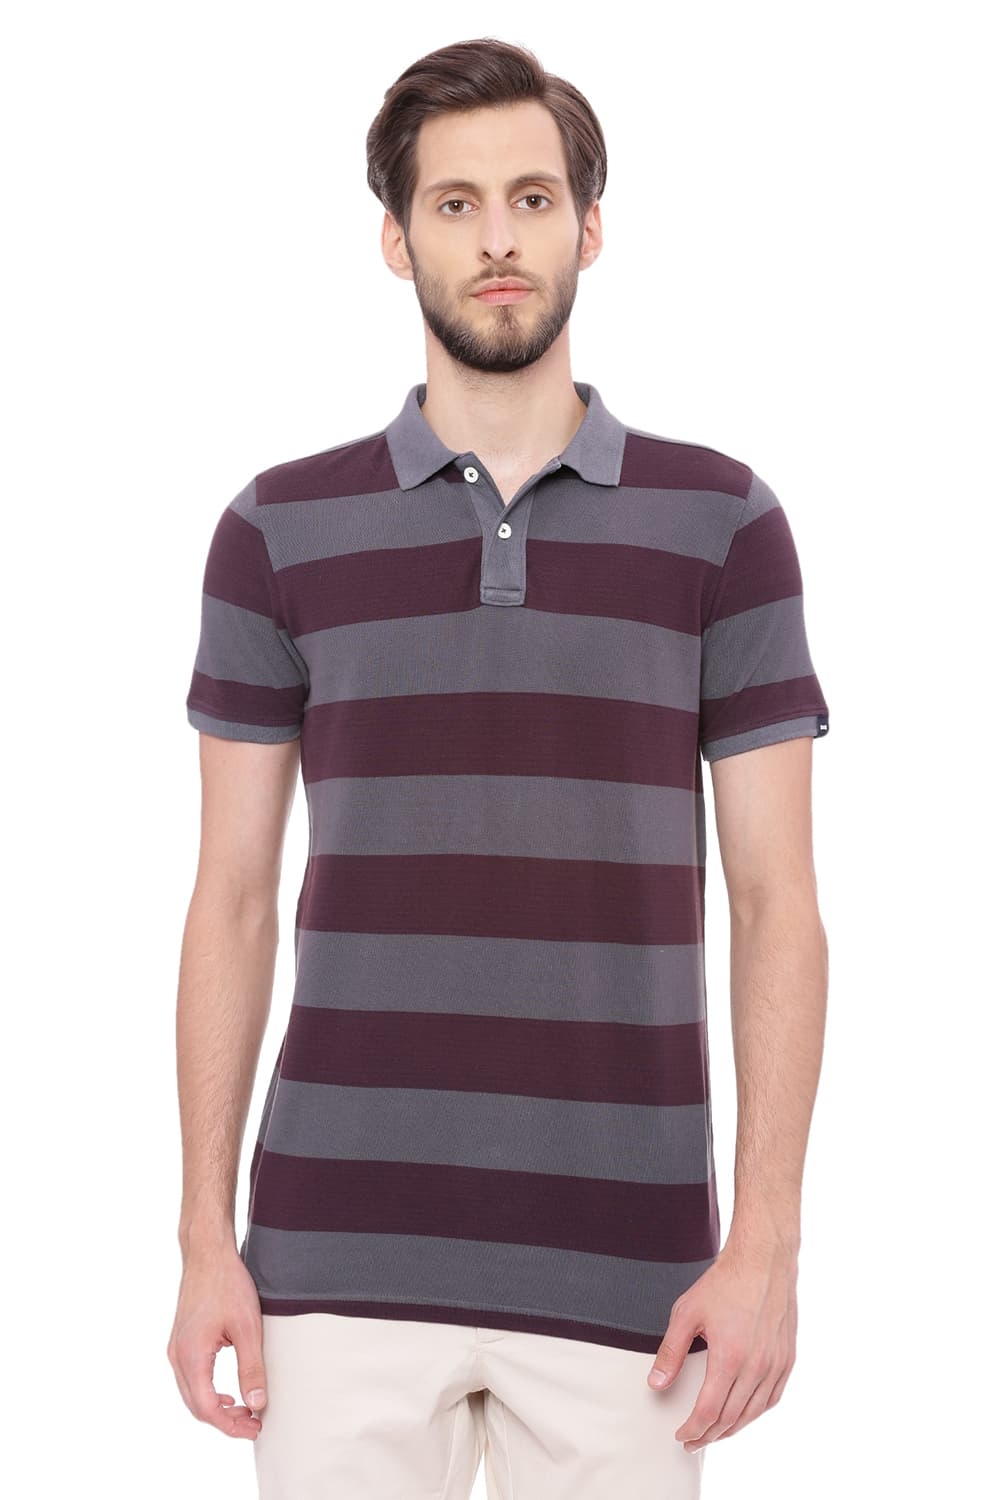 Basics | Basics Muscle Fit Dark Shadow Grey Striped Rugby Polo T Shirt